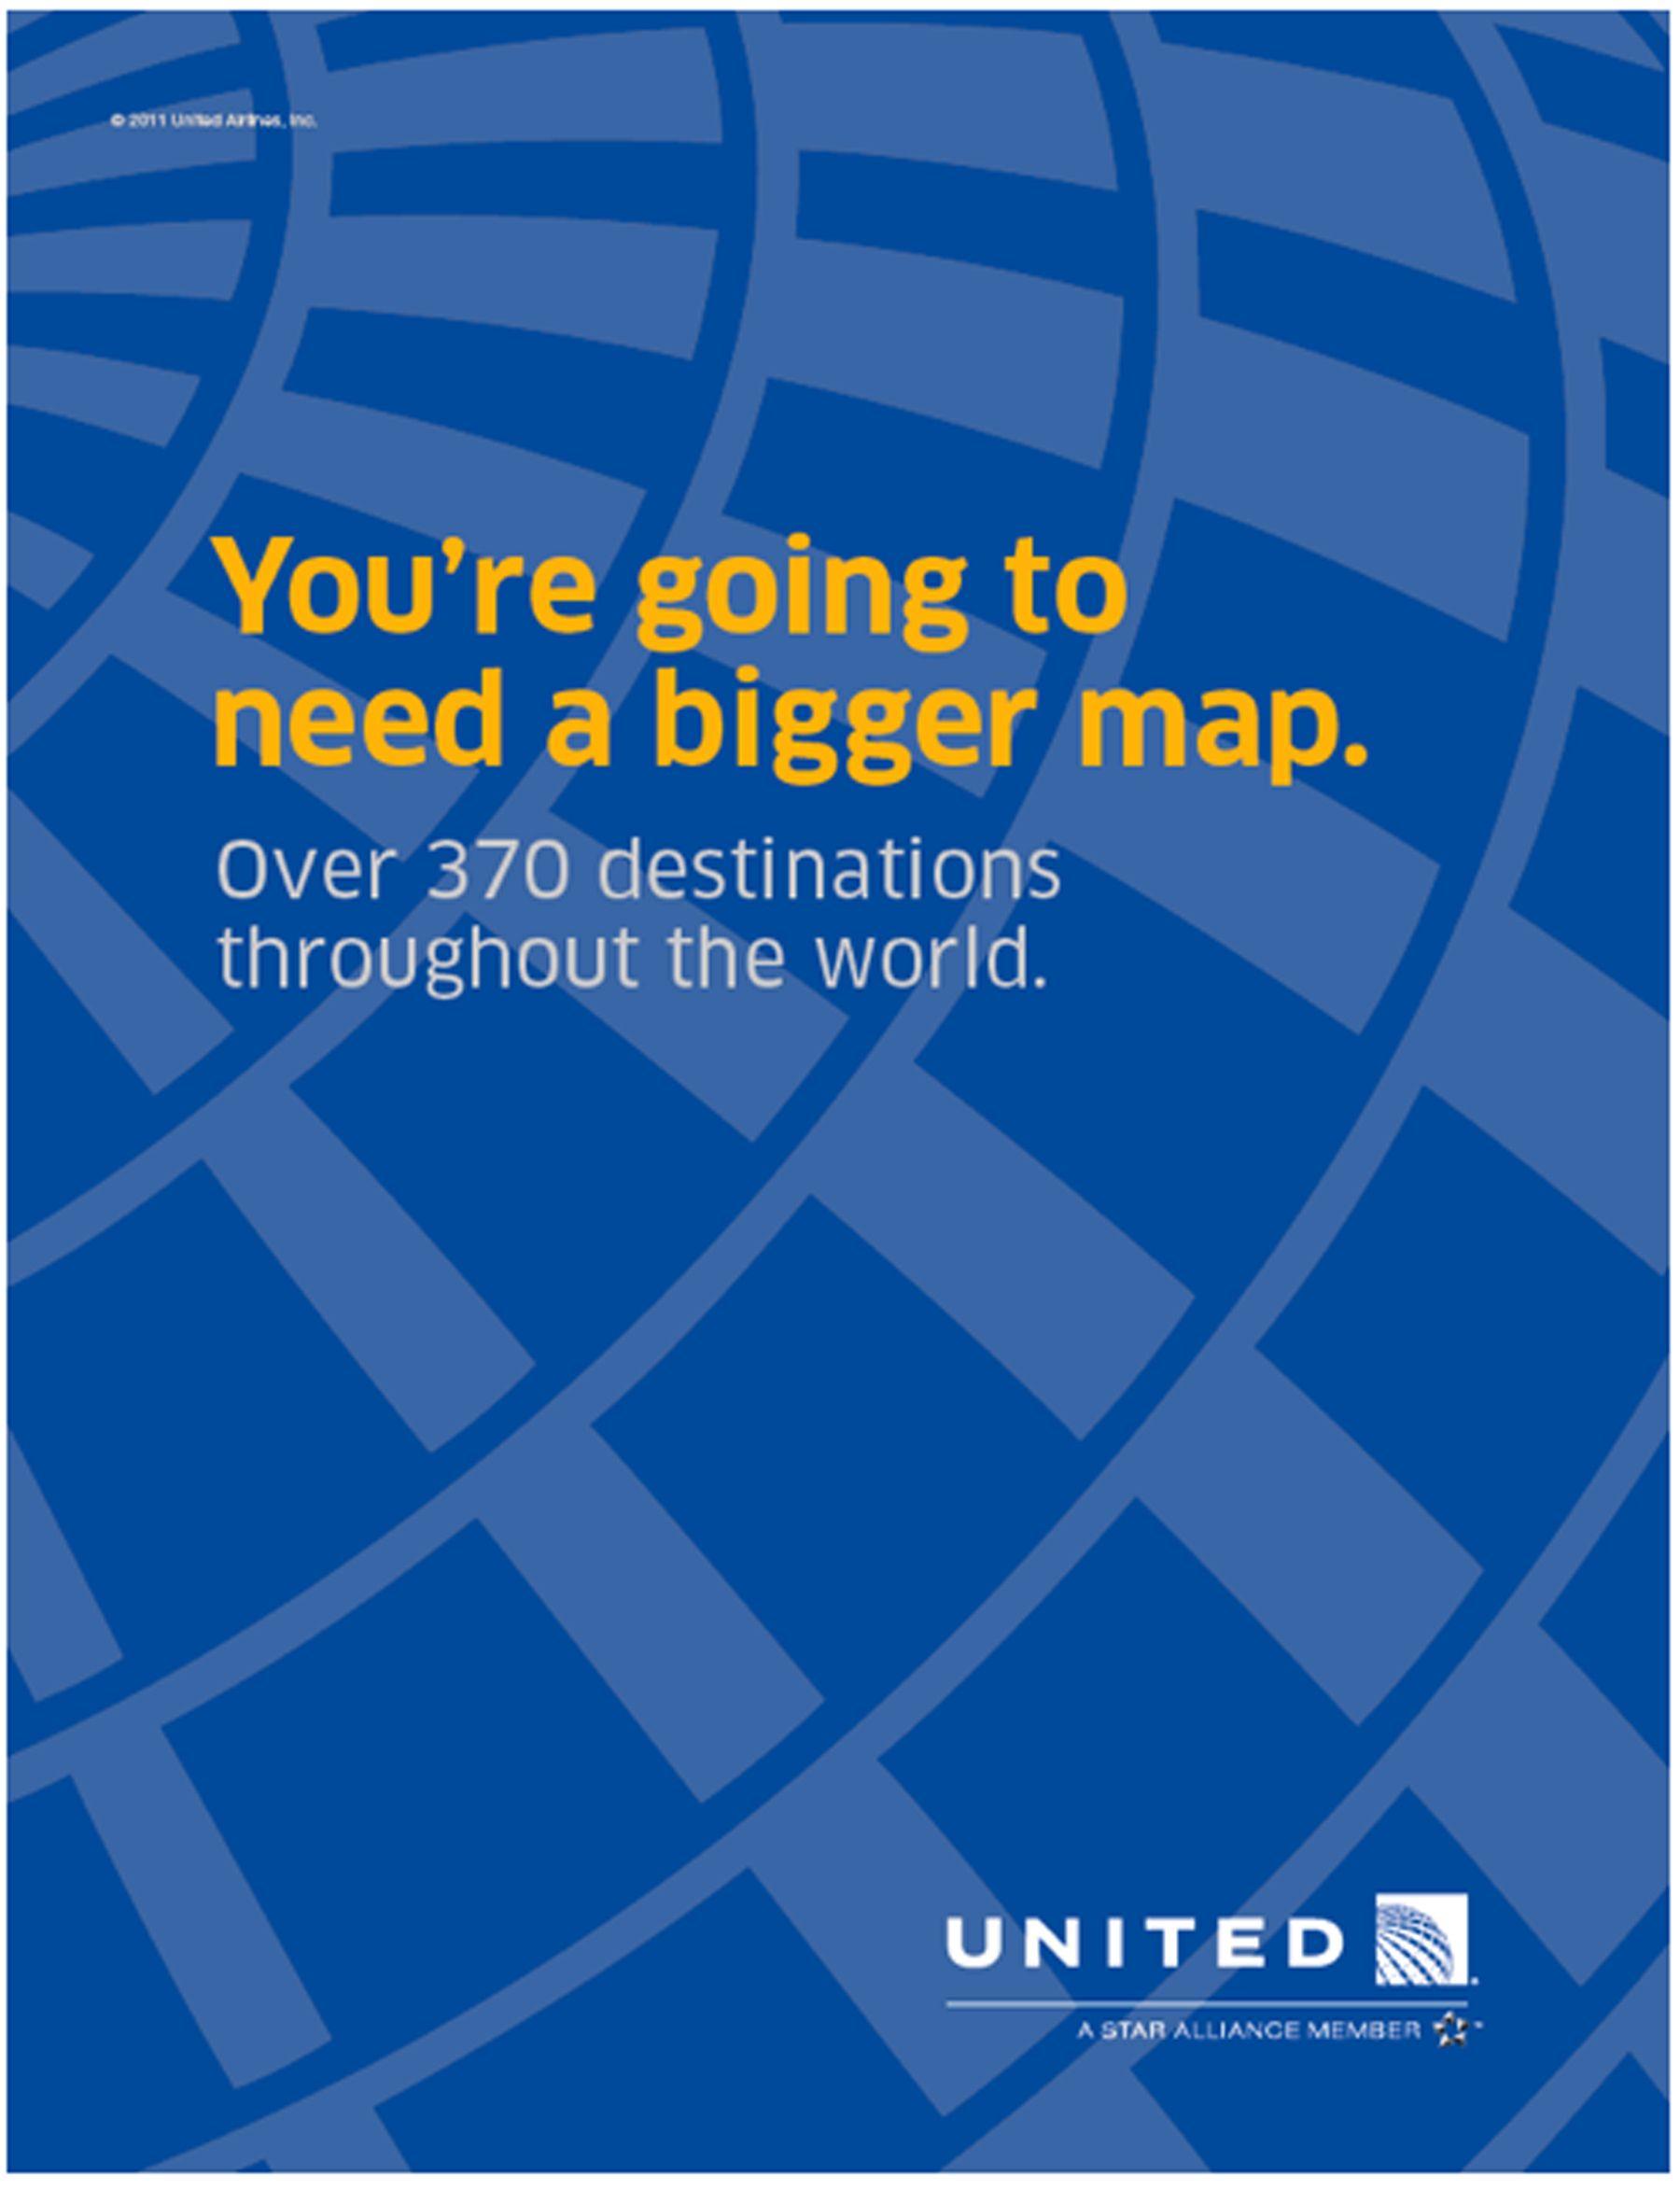 United Airlines Globe Logo - Airline Rebranding. Pitfalls and Opportunities. - Stealing Share